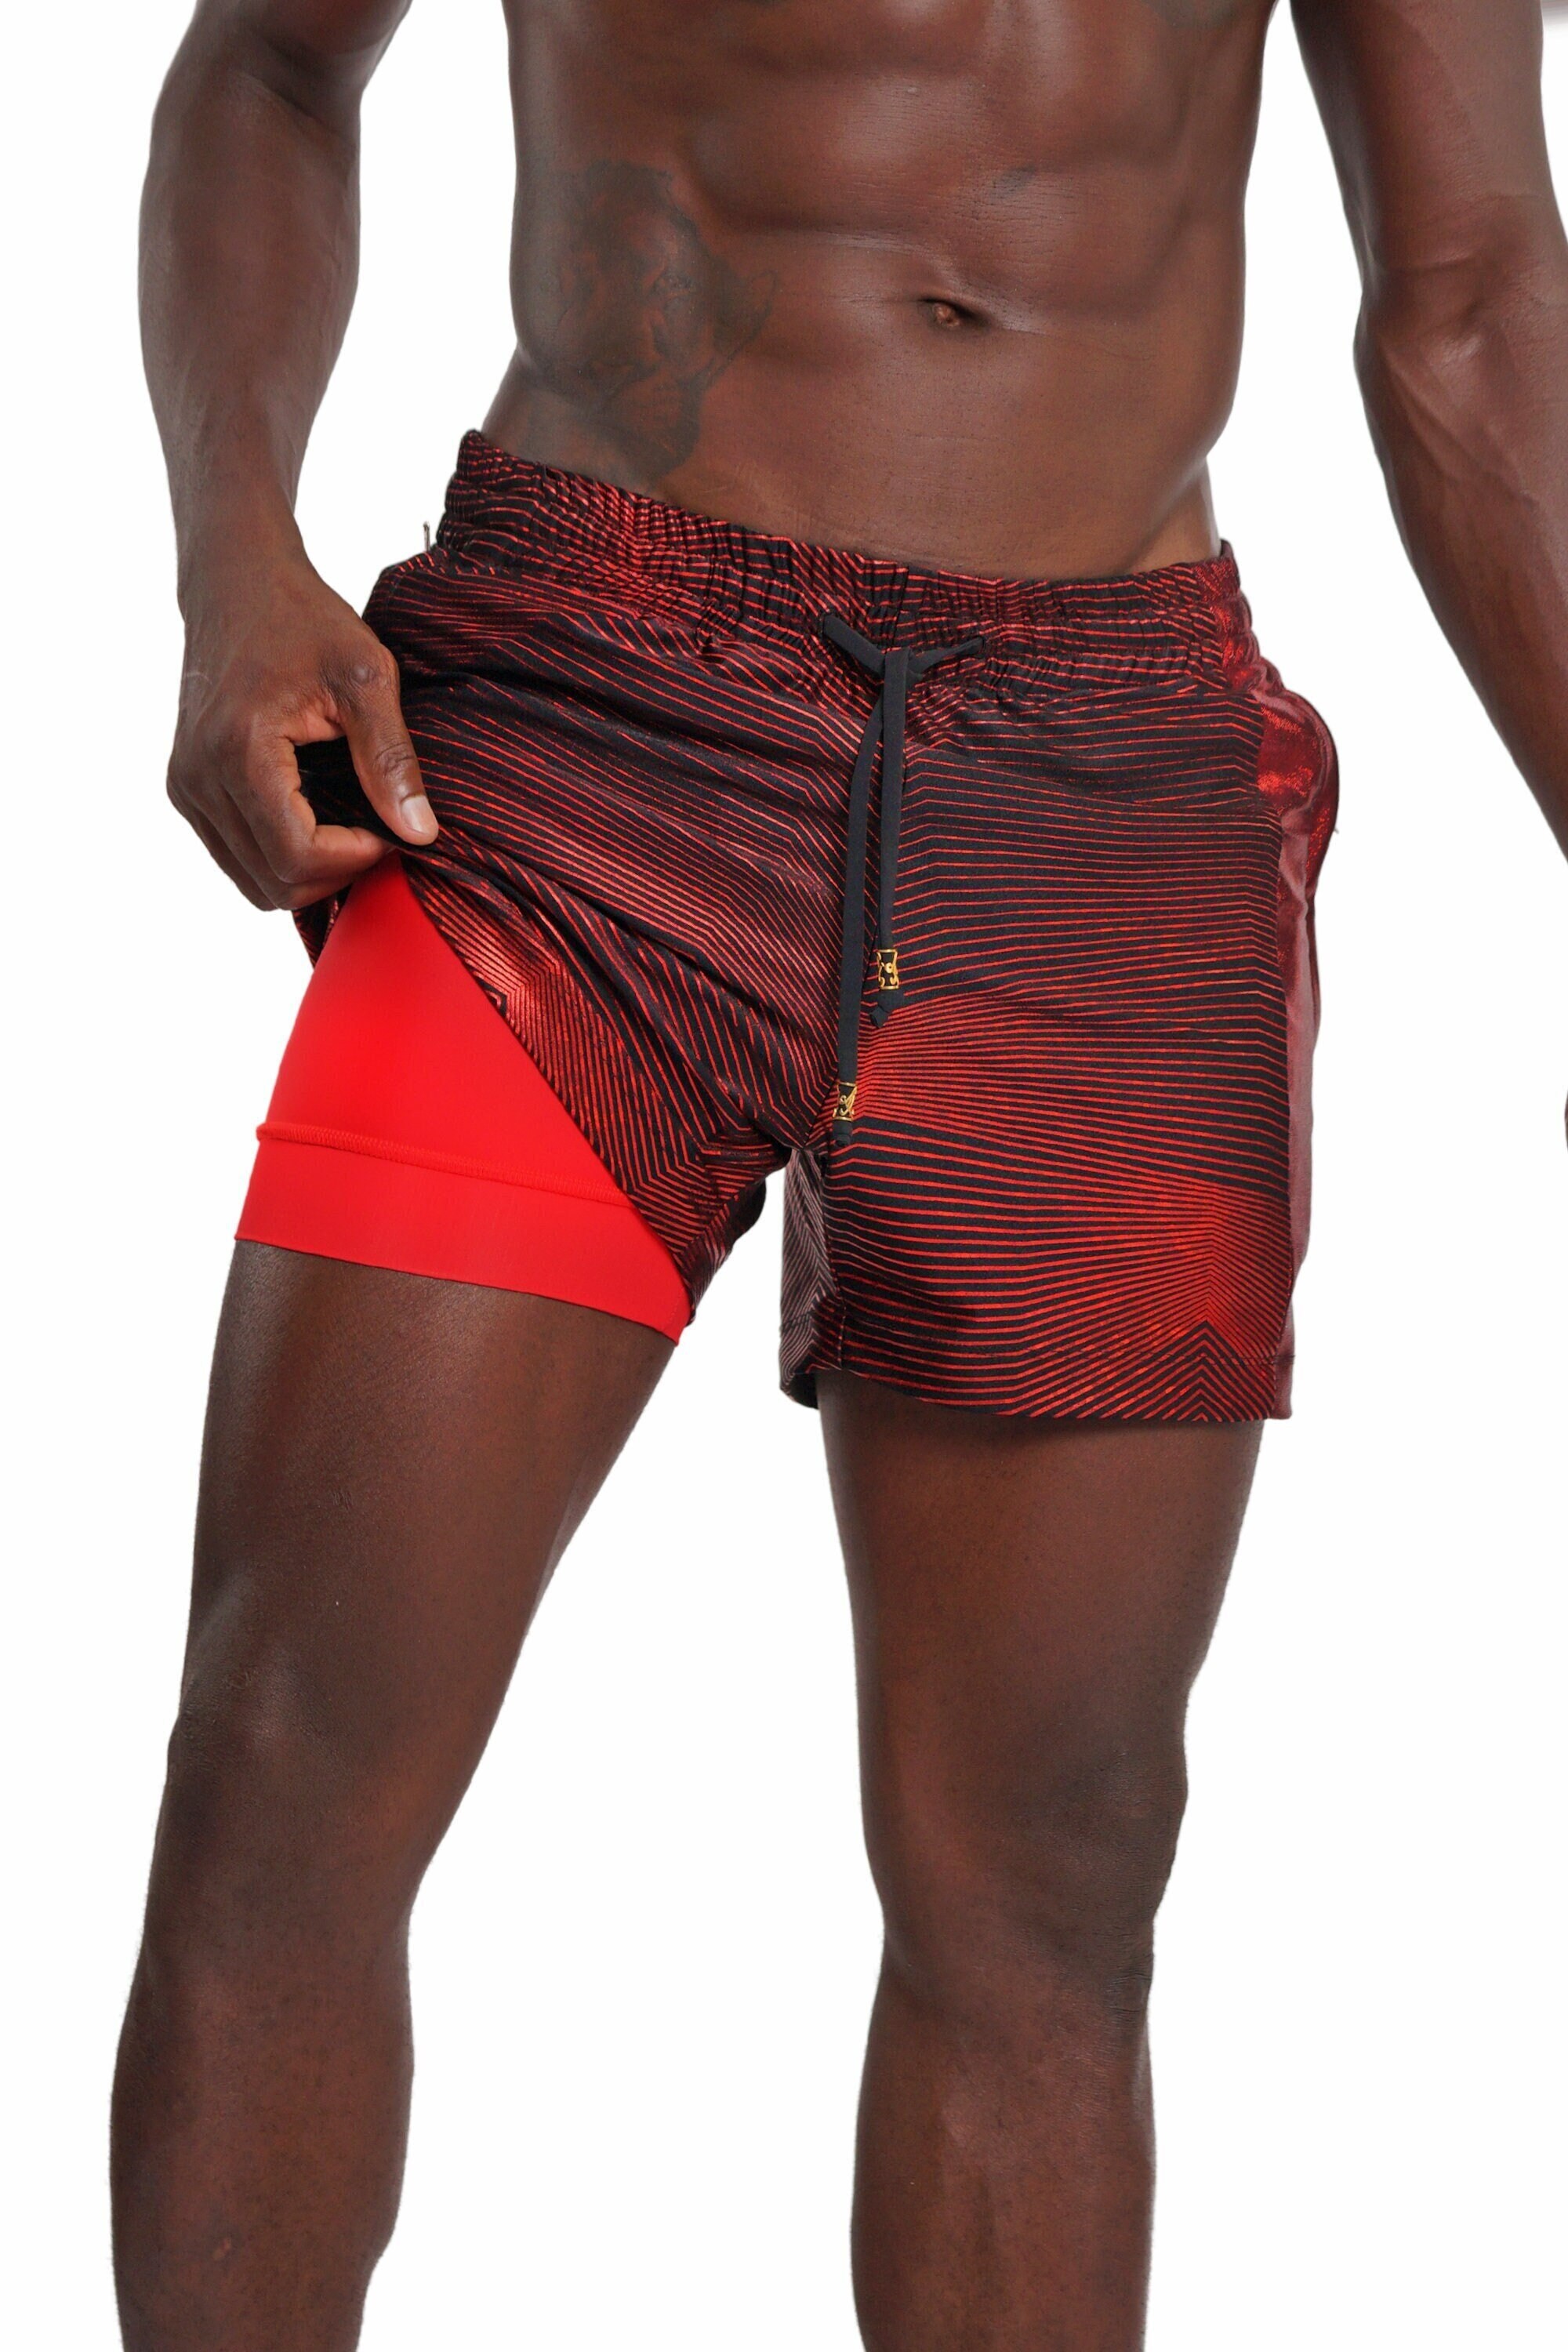 Buy Running Shorts Liner Online In India -  India